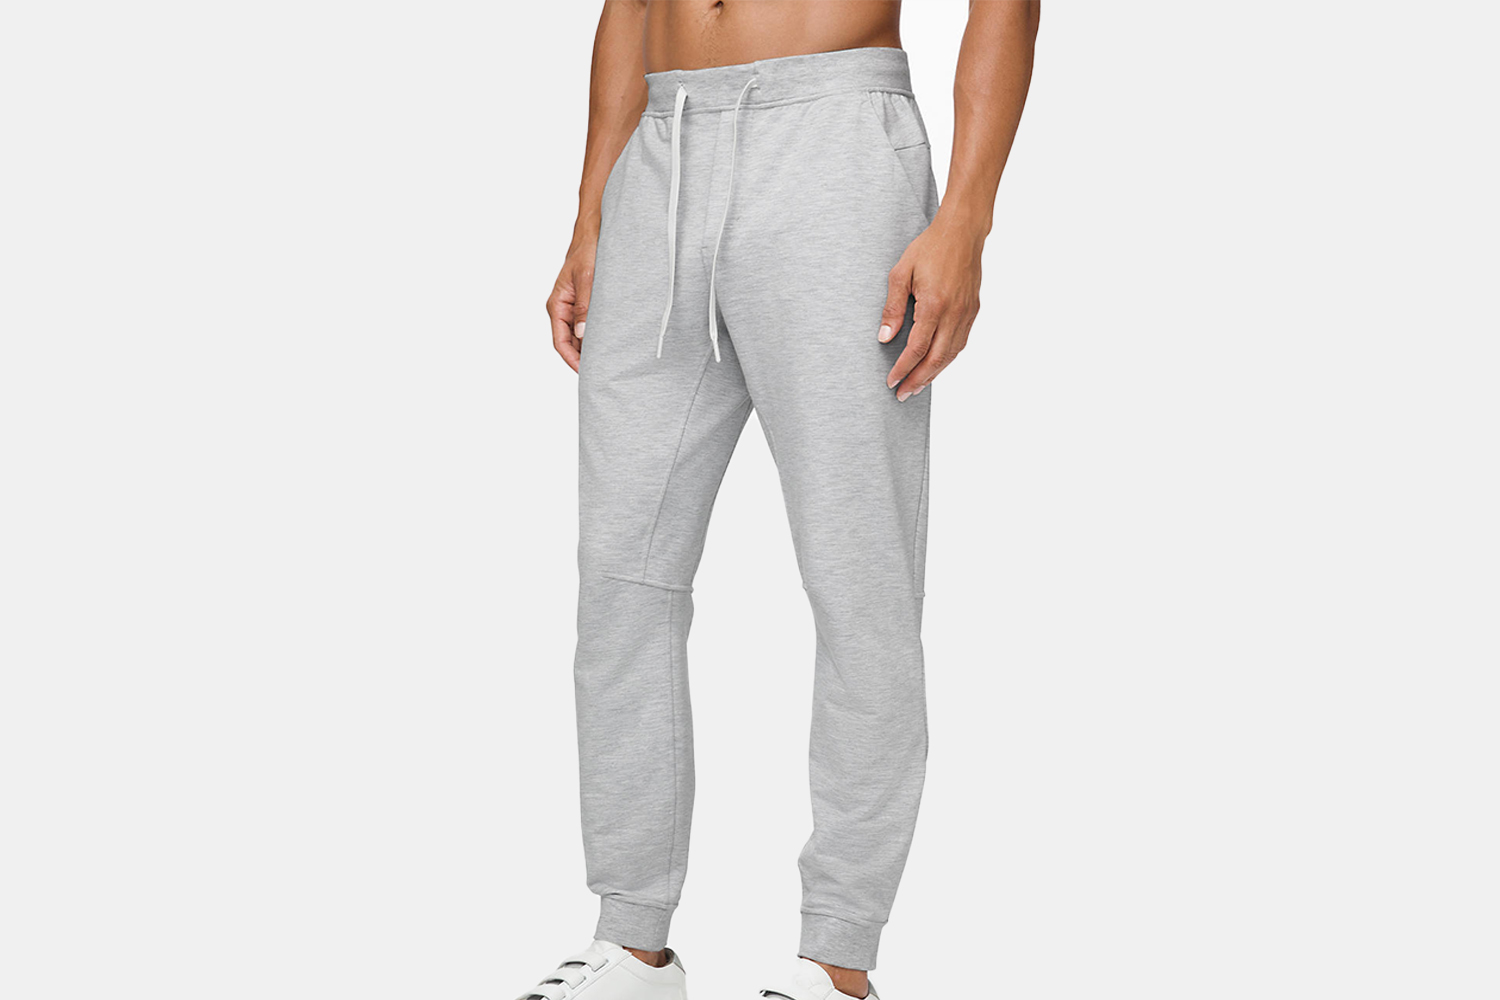 a model in some grey sweats 